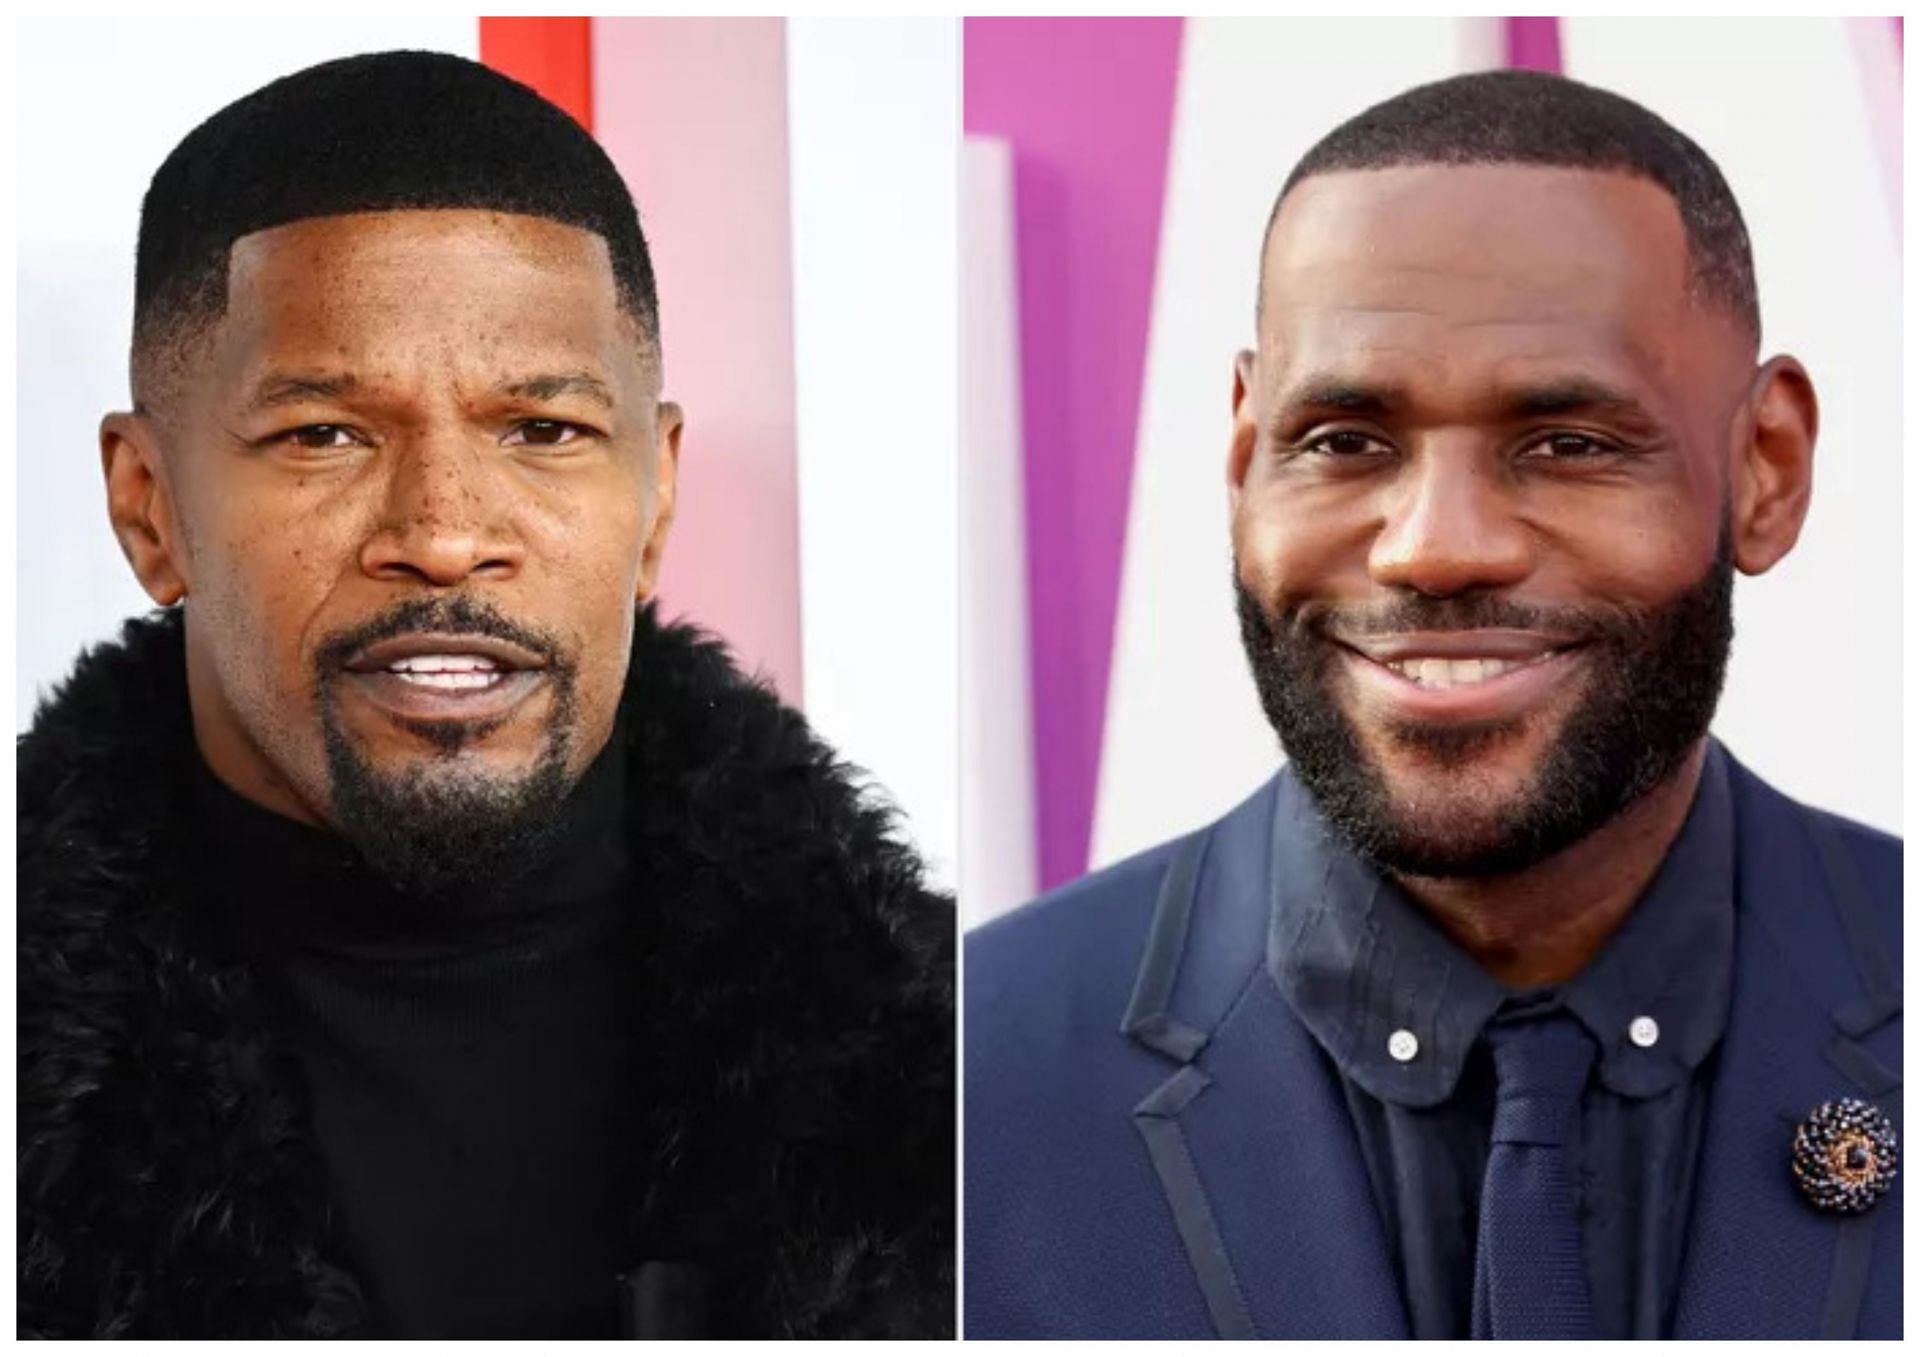 Actor Jamie Foxx and NBA legend LeBron James (Photo: Joe Maher/Getty Images and Kevin Winter/Getty Images)